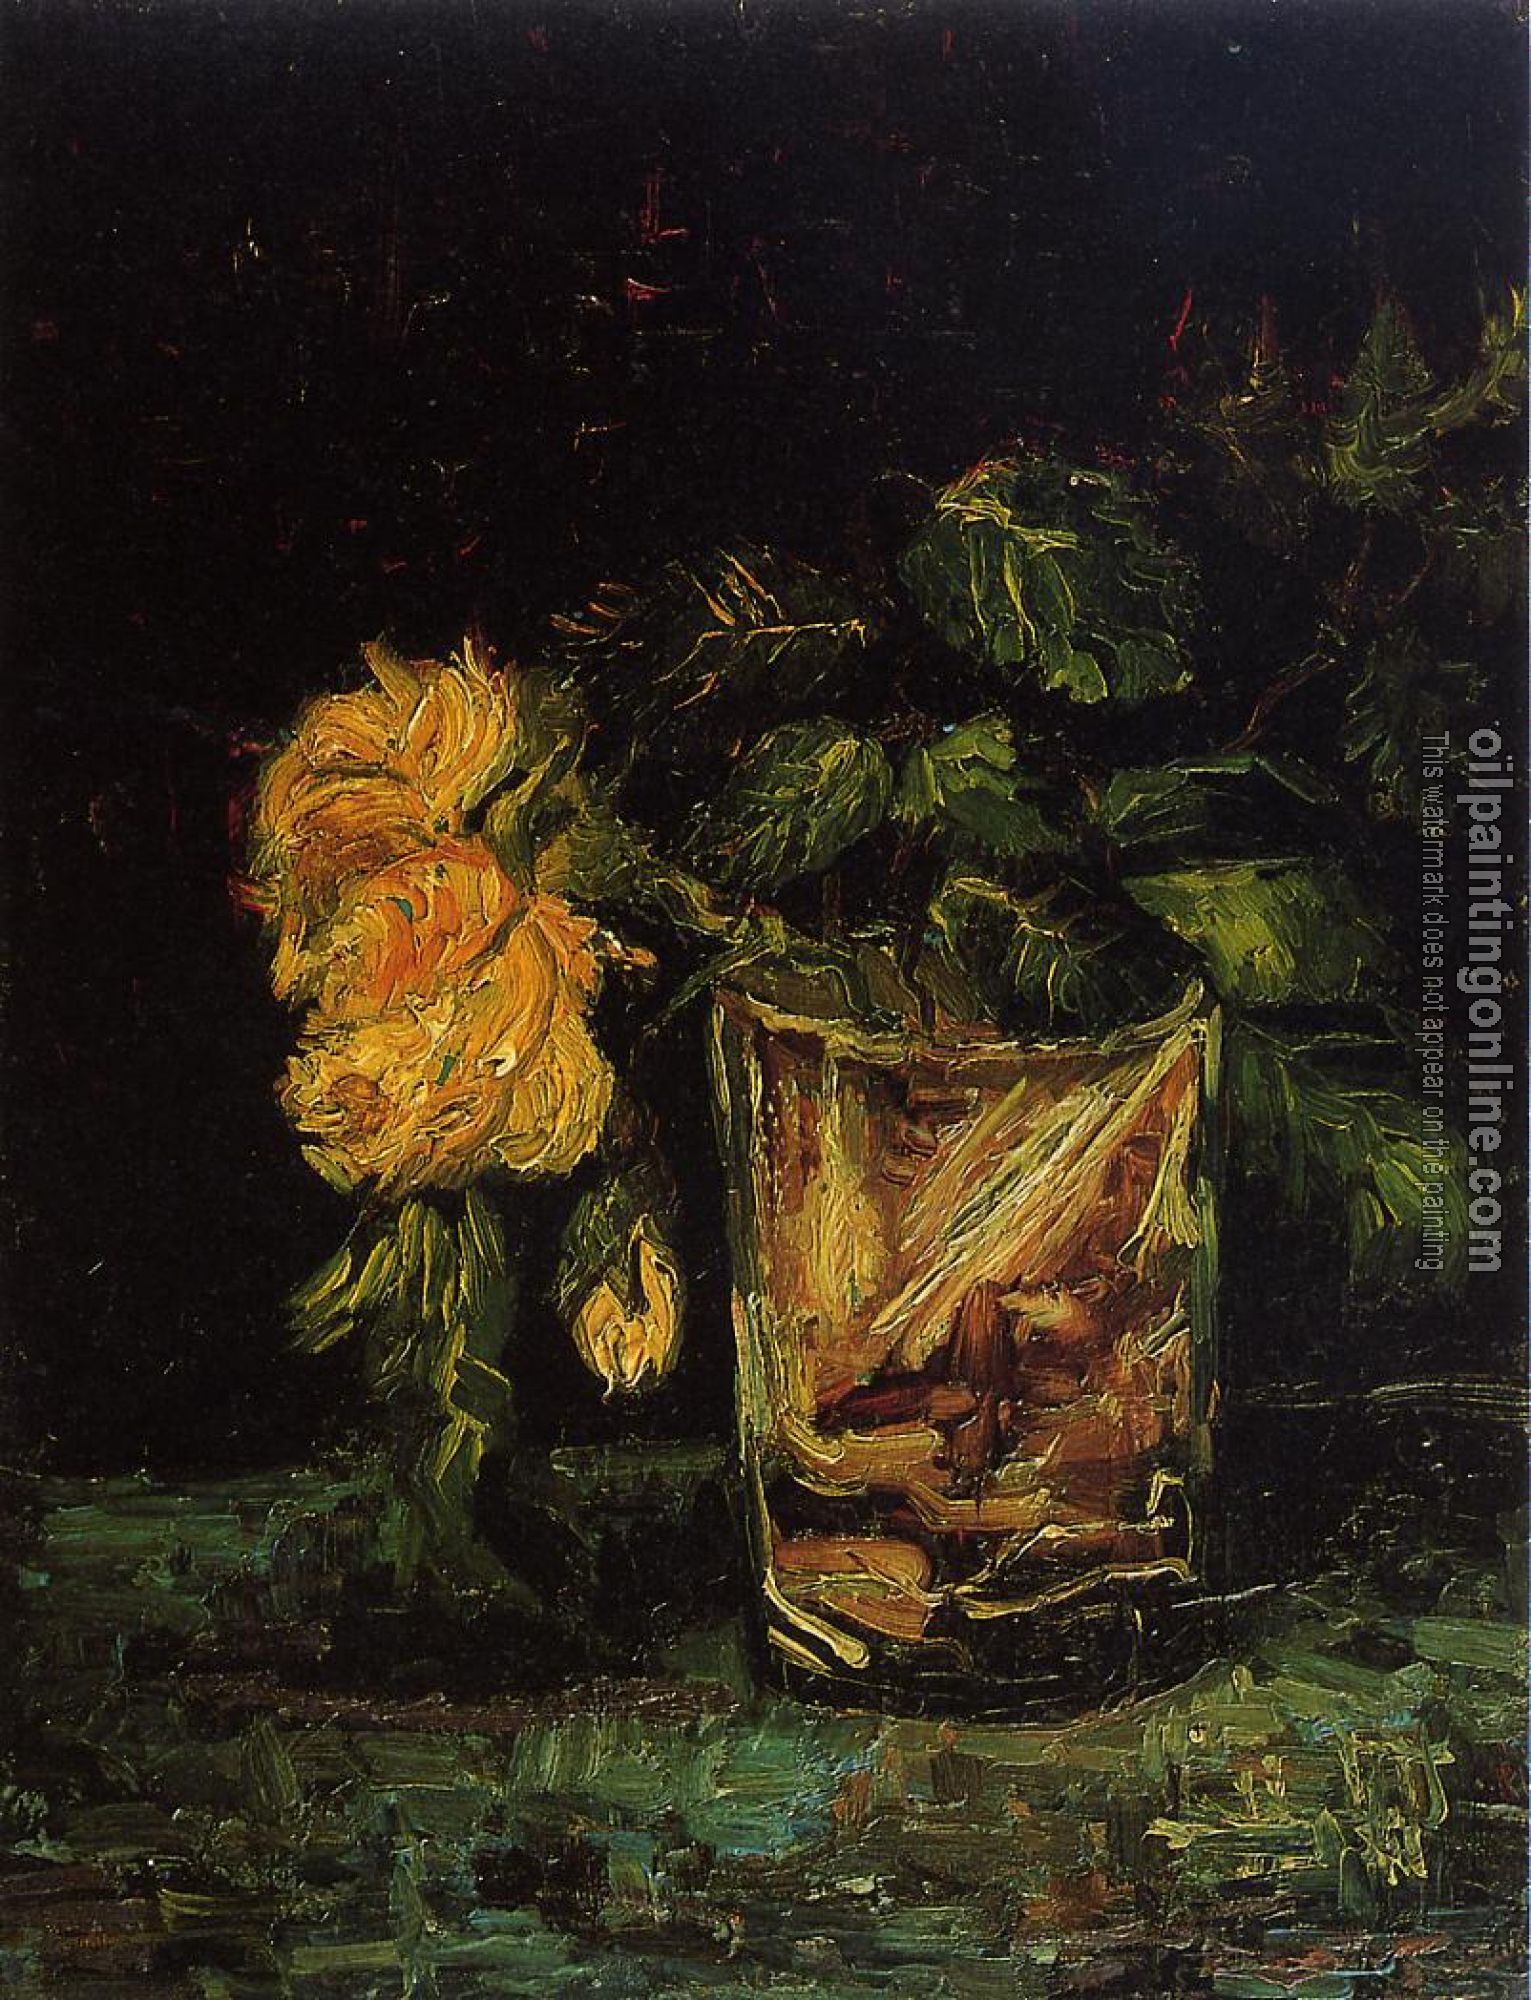 Gogh, Vincent van - Glass with Roses